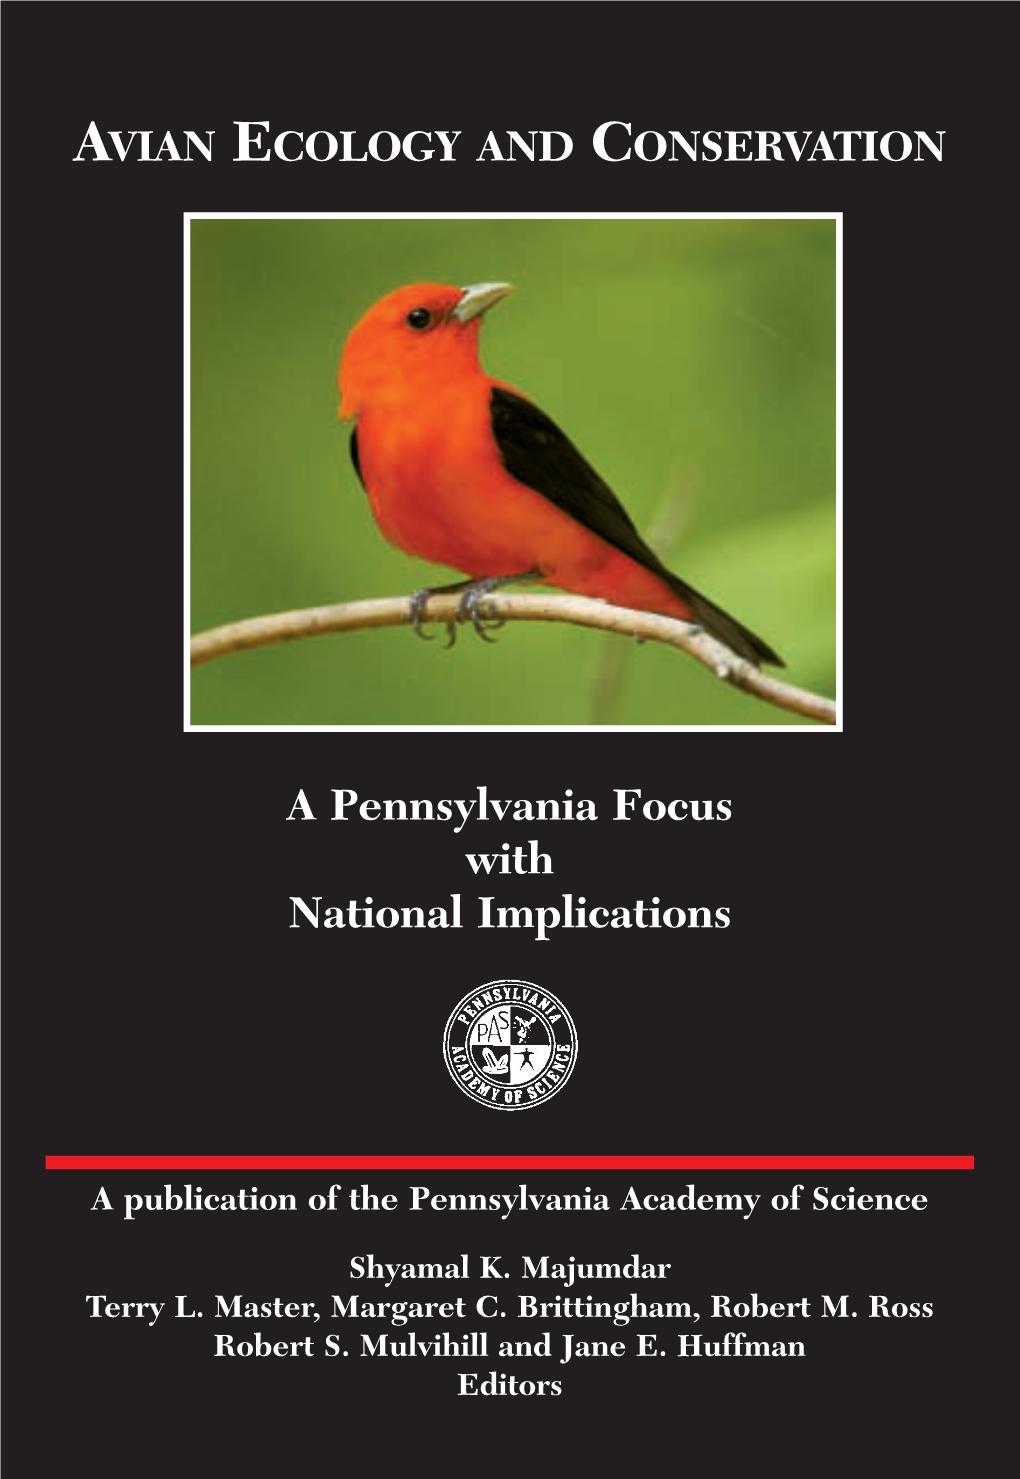 Avian Ecology and Conservation: a Pennsylvania Focus with National Implications, 2010